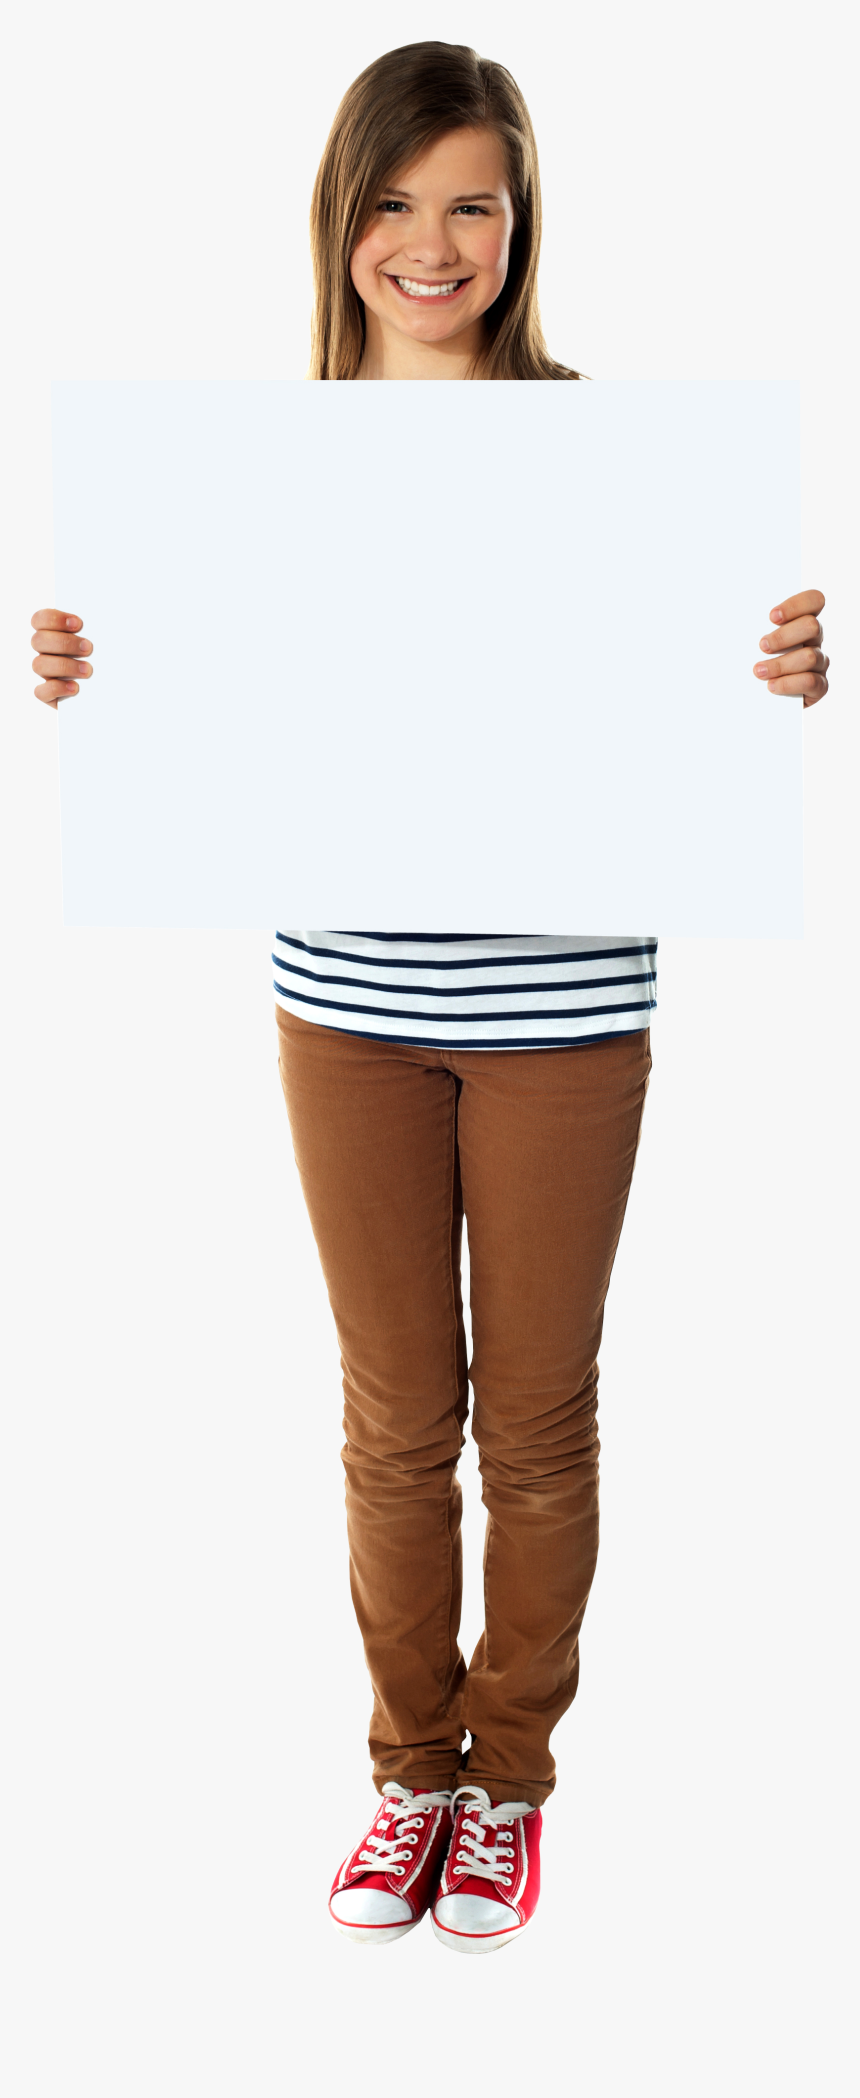 Corporate Girl Png, Transparent Png, Free Download